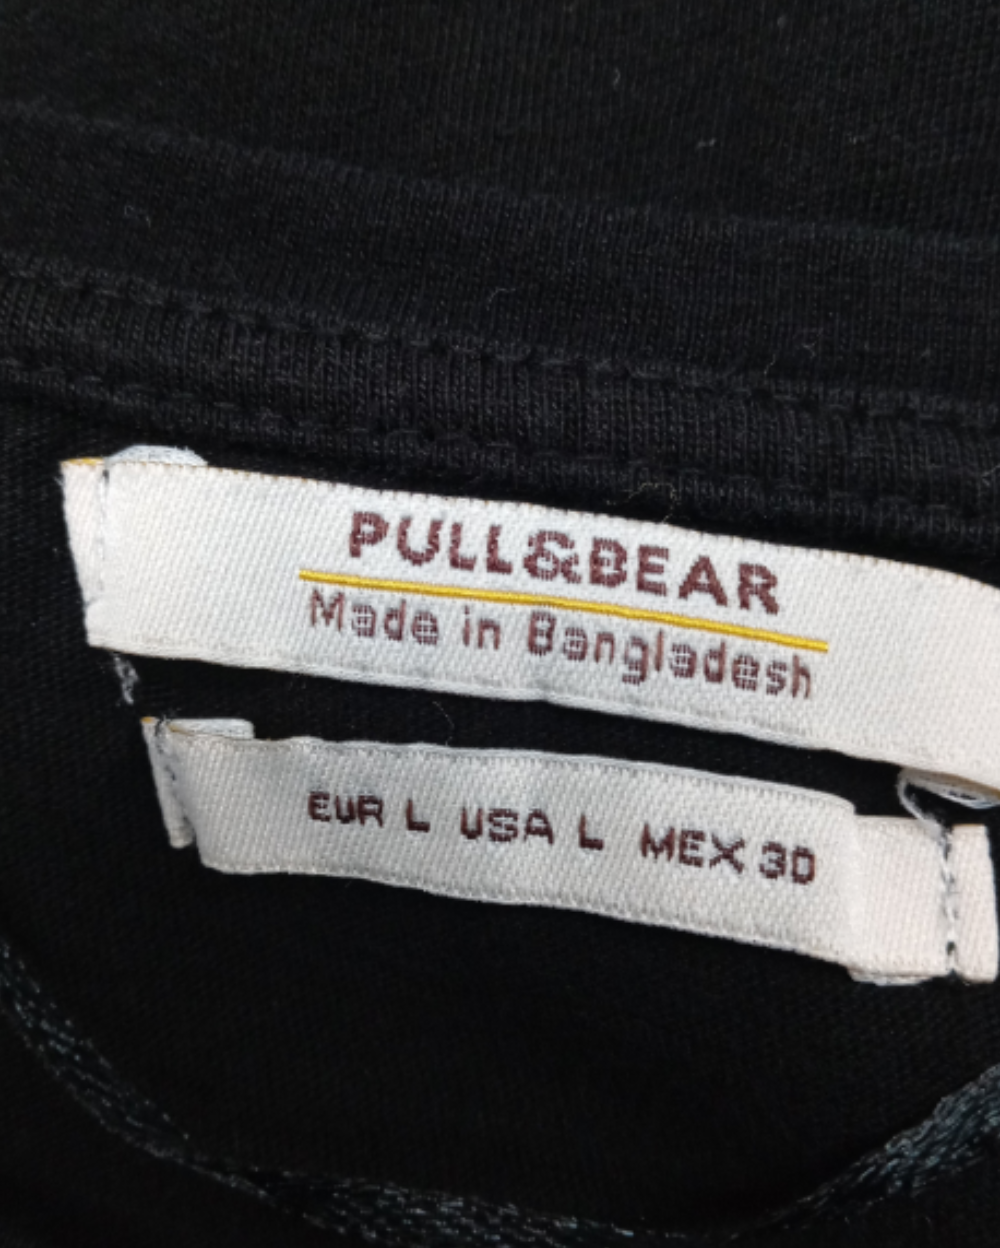 Blusas Casuales Pull & Bear